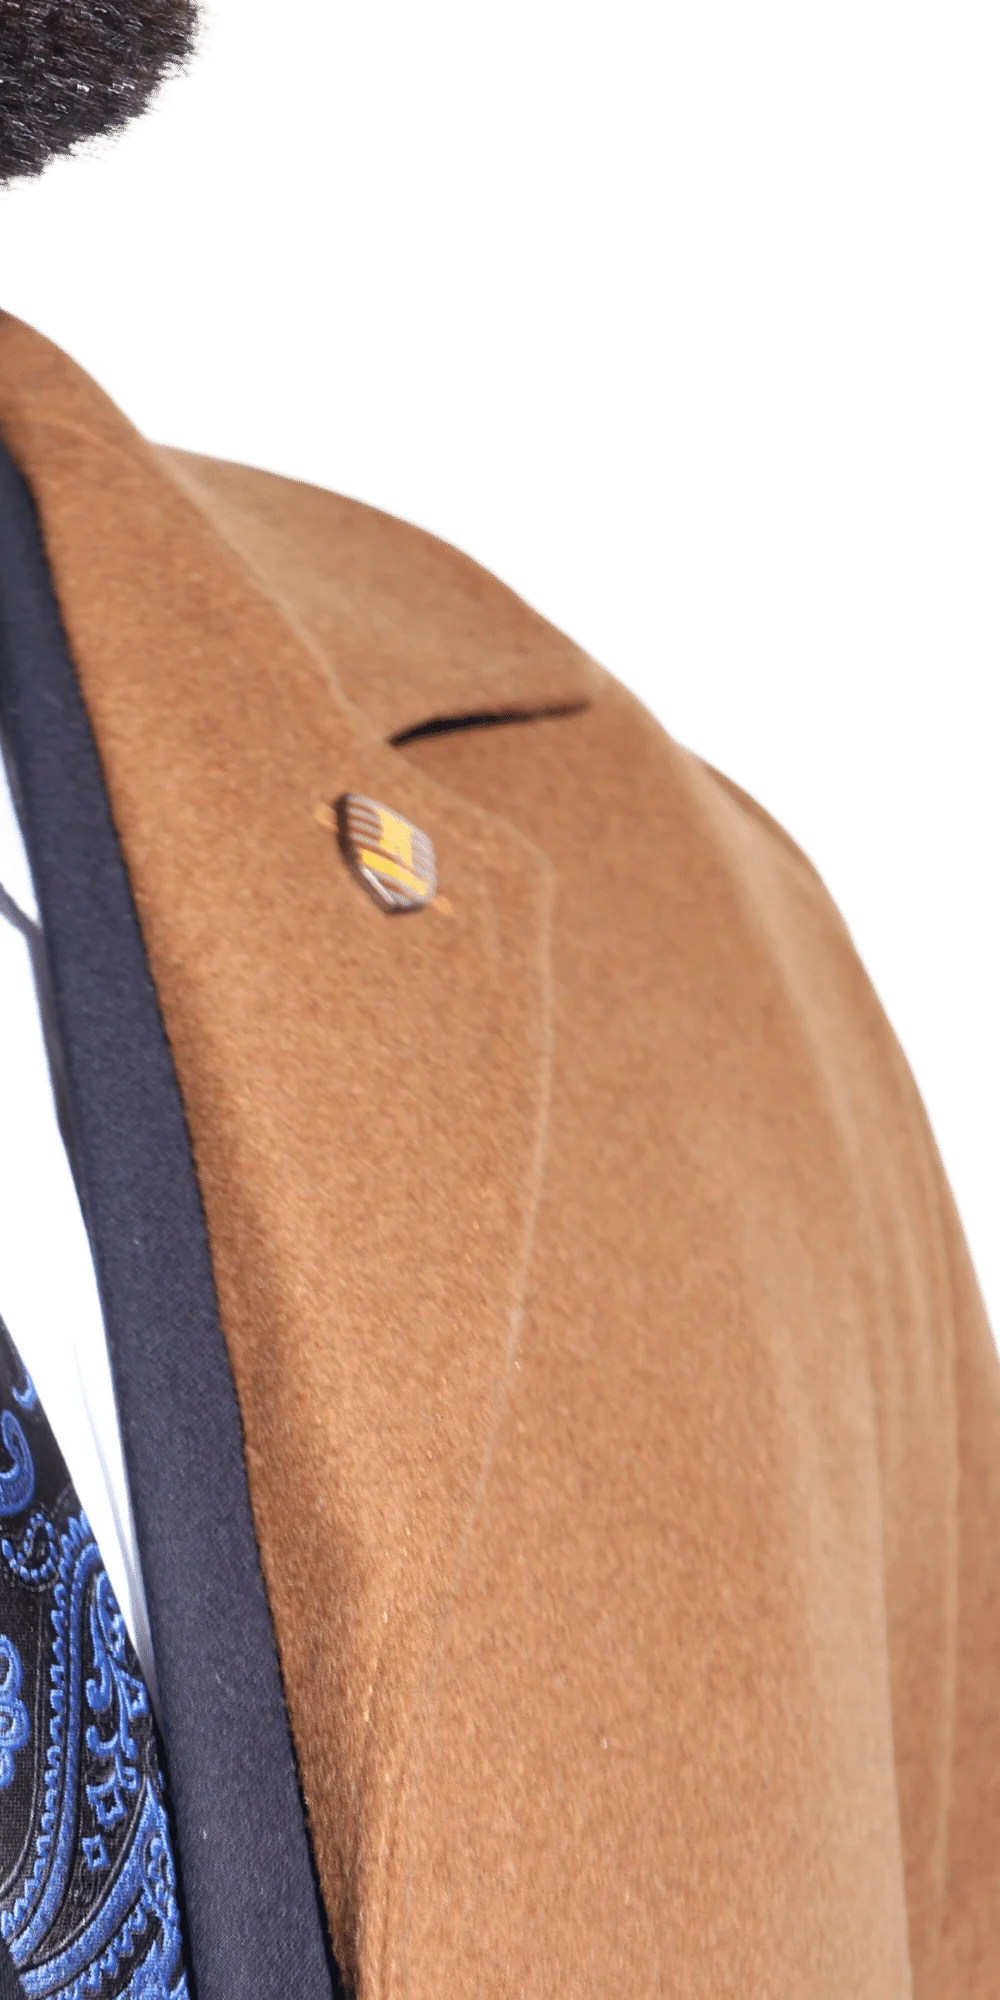 Men's Navada Clothing Cashmere Trenchcoat/overcoat in Tan (111) available in-store, 337 Monty Naicker Street, Durban CBD or online at Omar's Tailors & Outfitters online store.   A men's fashion curation for South African men - established in 1911.